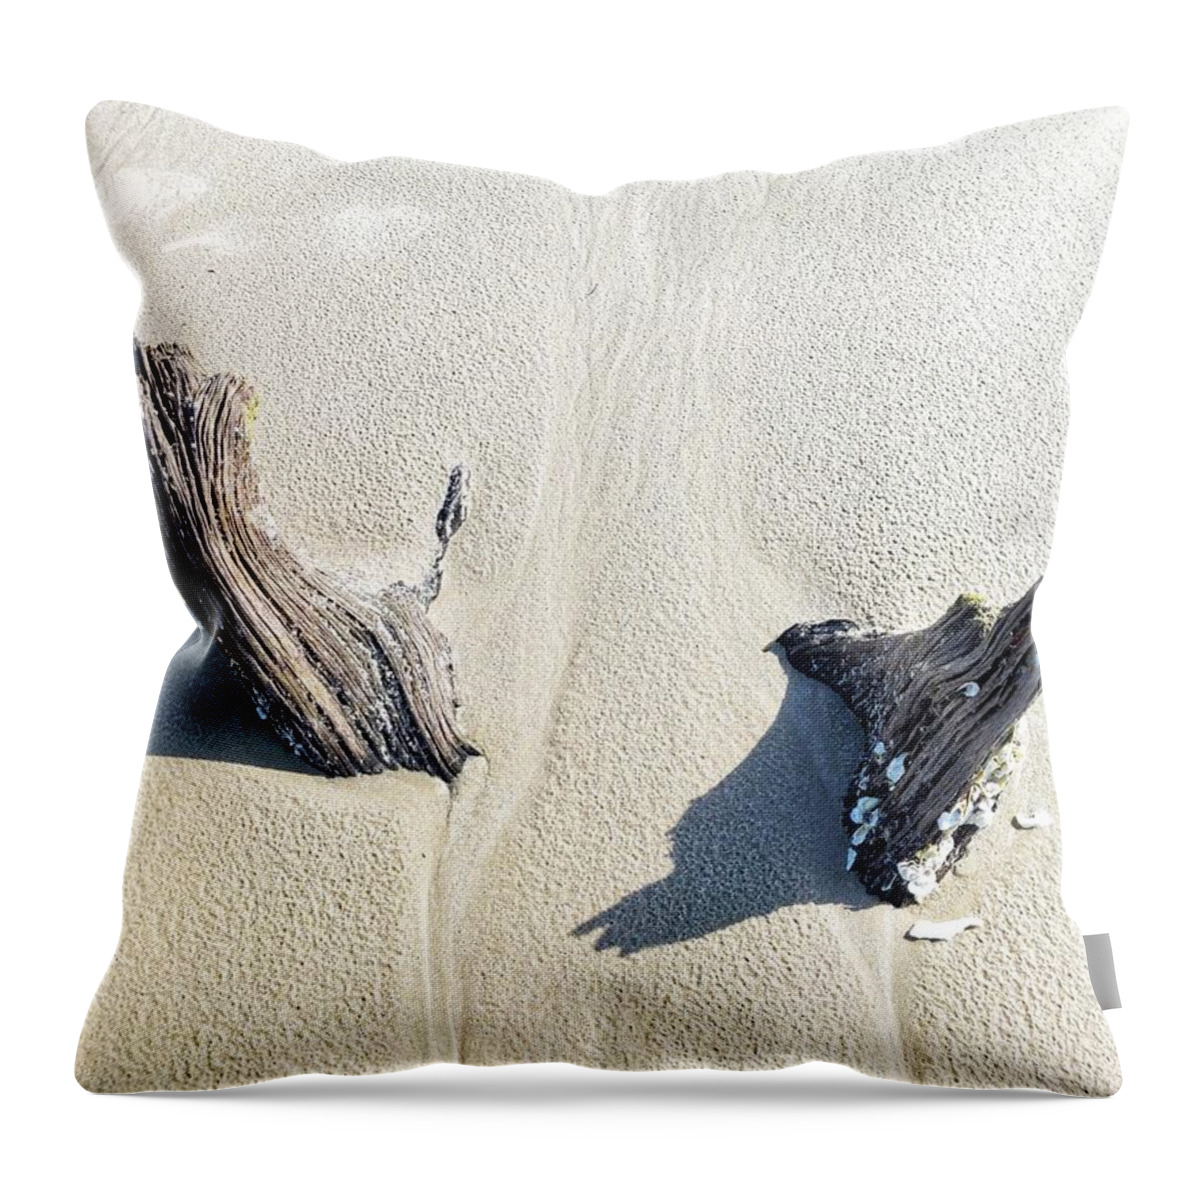 Landscape Throw Pillow featuring the photograph Shining Light by Portia Olaughlin